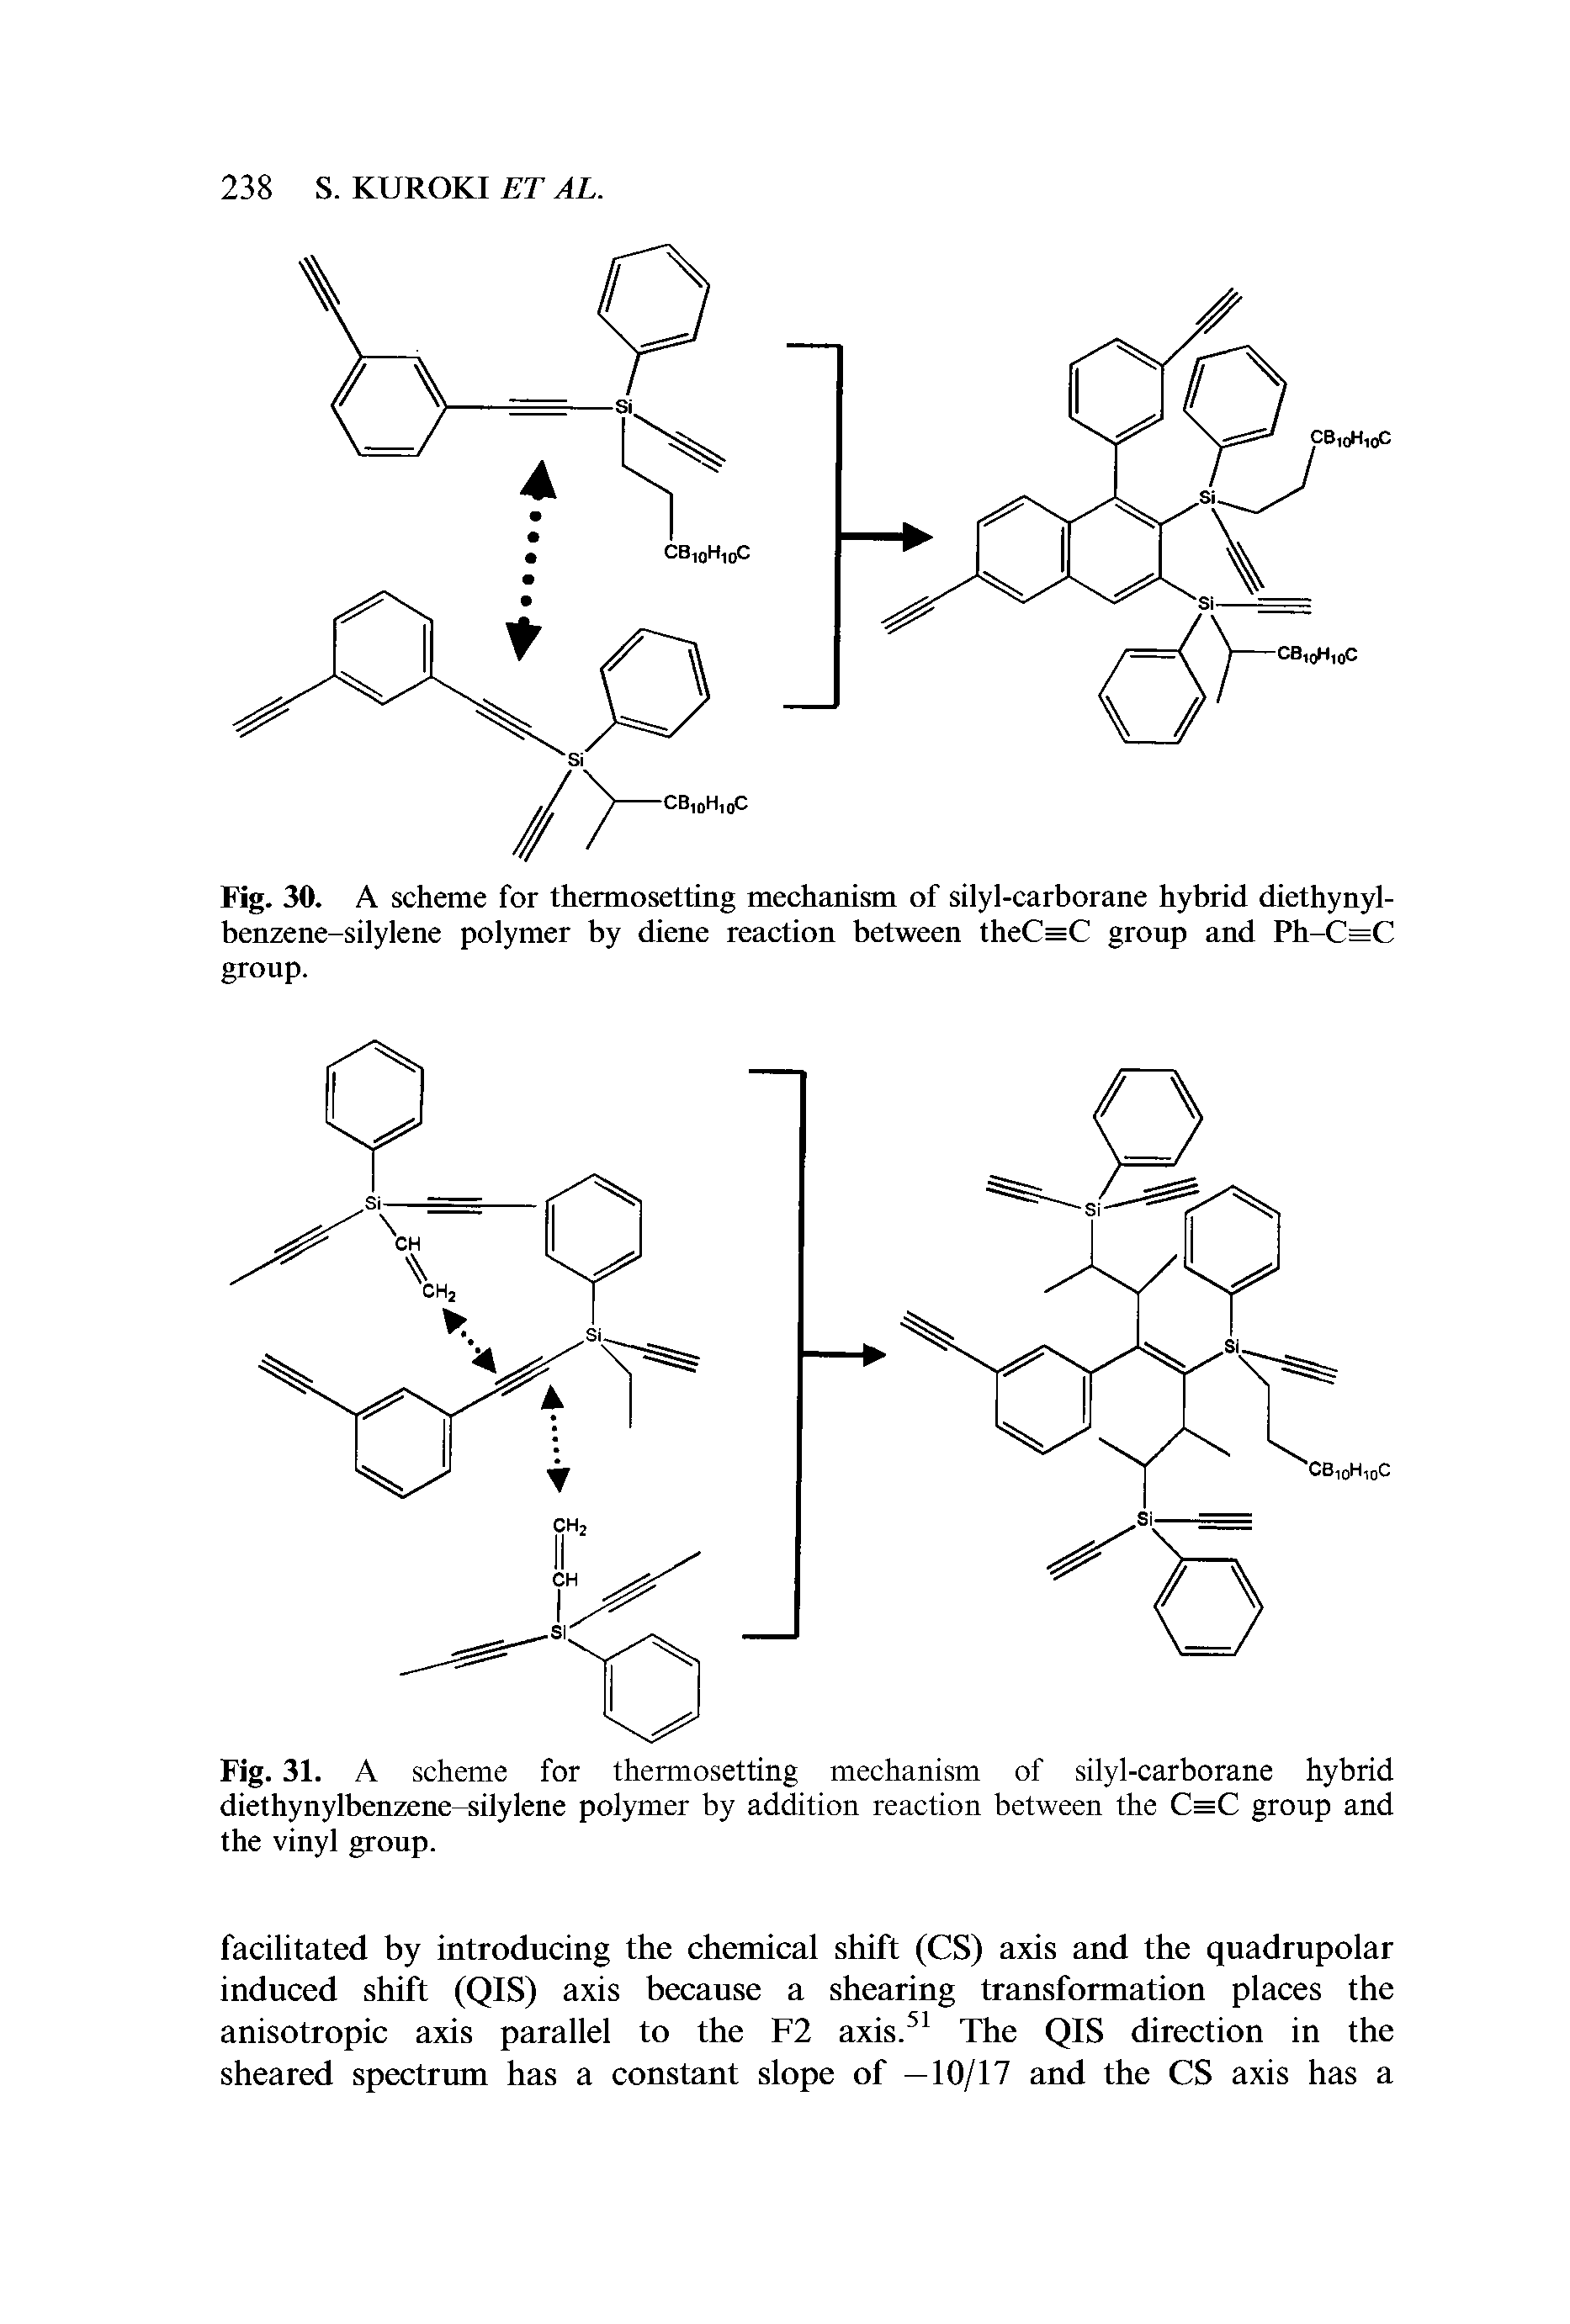 Fig. 31. A scheme for thennosetting mechanism of silyl-carborane hybrid diethynylbenzene-silylene polymer by addition reaction between the C=C group and the vinyl group.